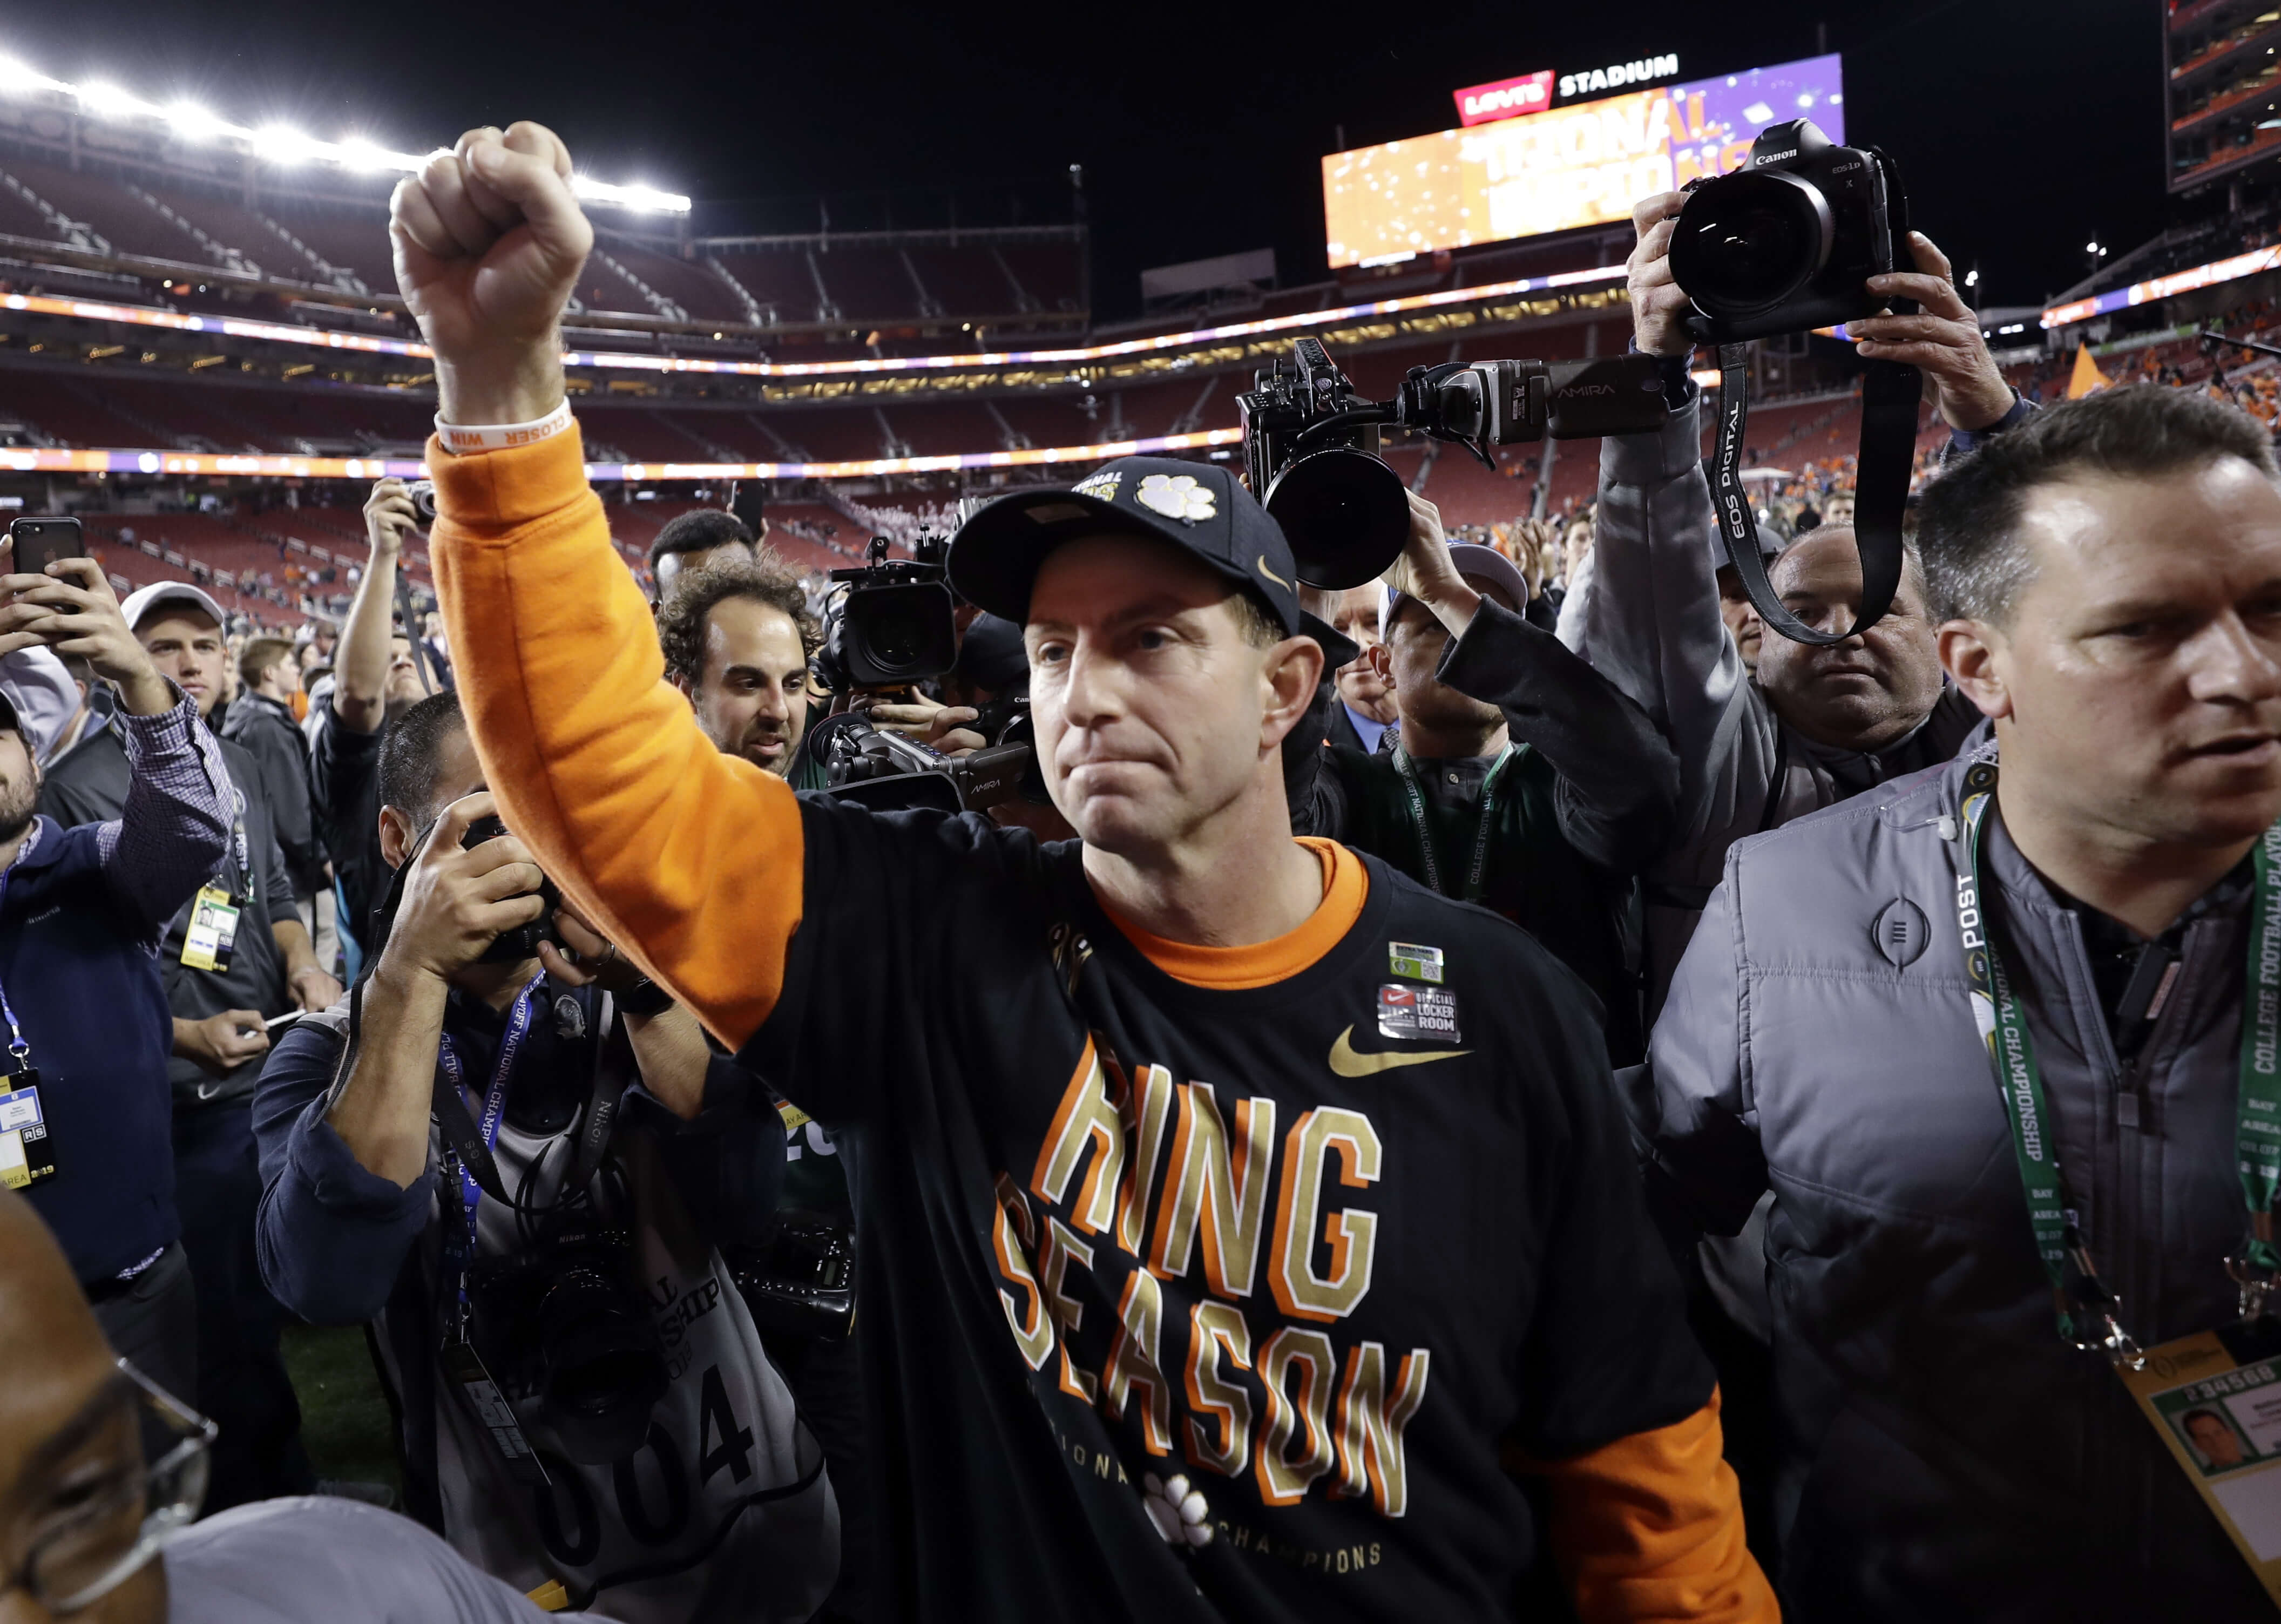 Clemson football coach Dabo Swinney celebrates Monday night after his Tigers crushed Alabama to finish 15-0 and win the national championship.